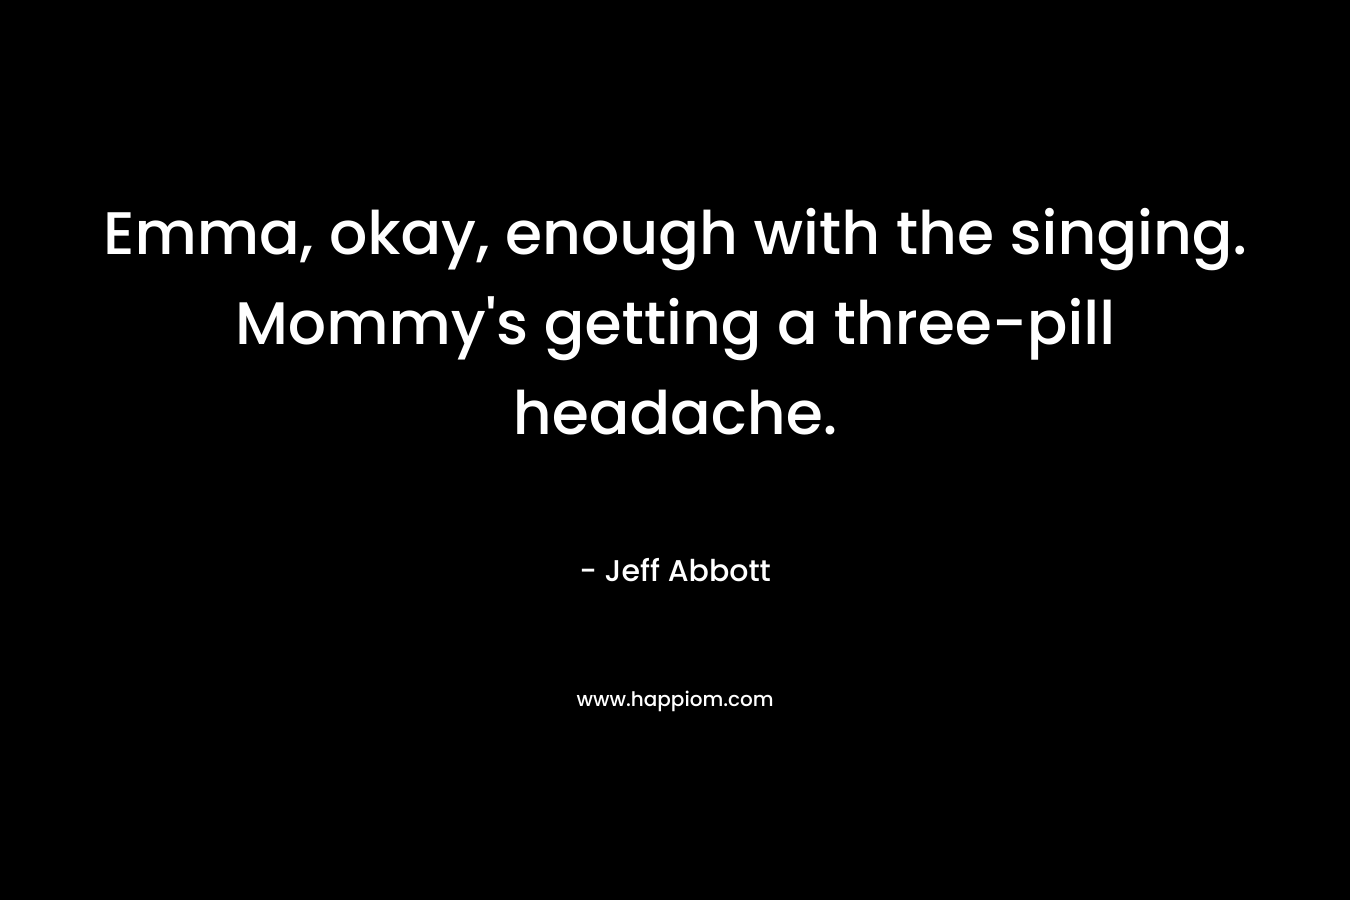 Emma, okay, enough with the singing. Mommy's getting a three-pill headache.